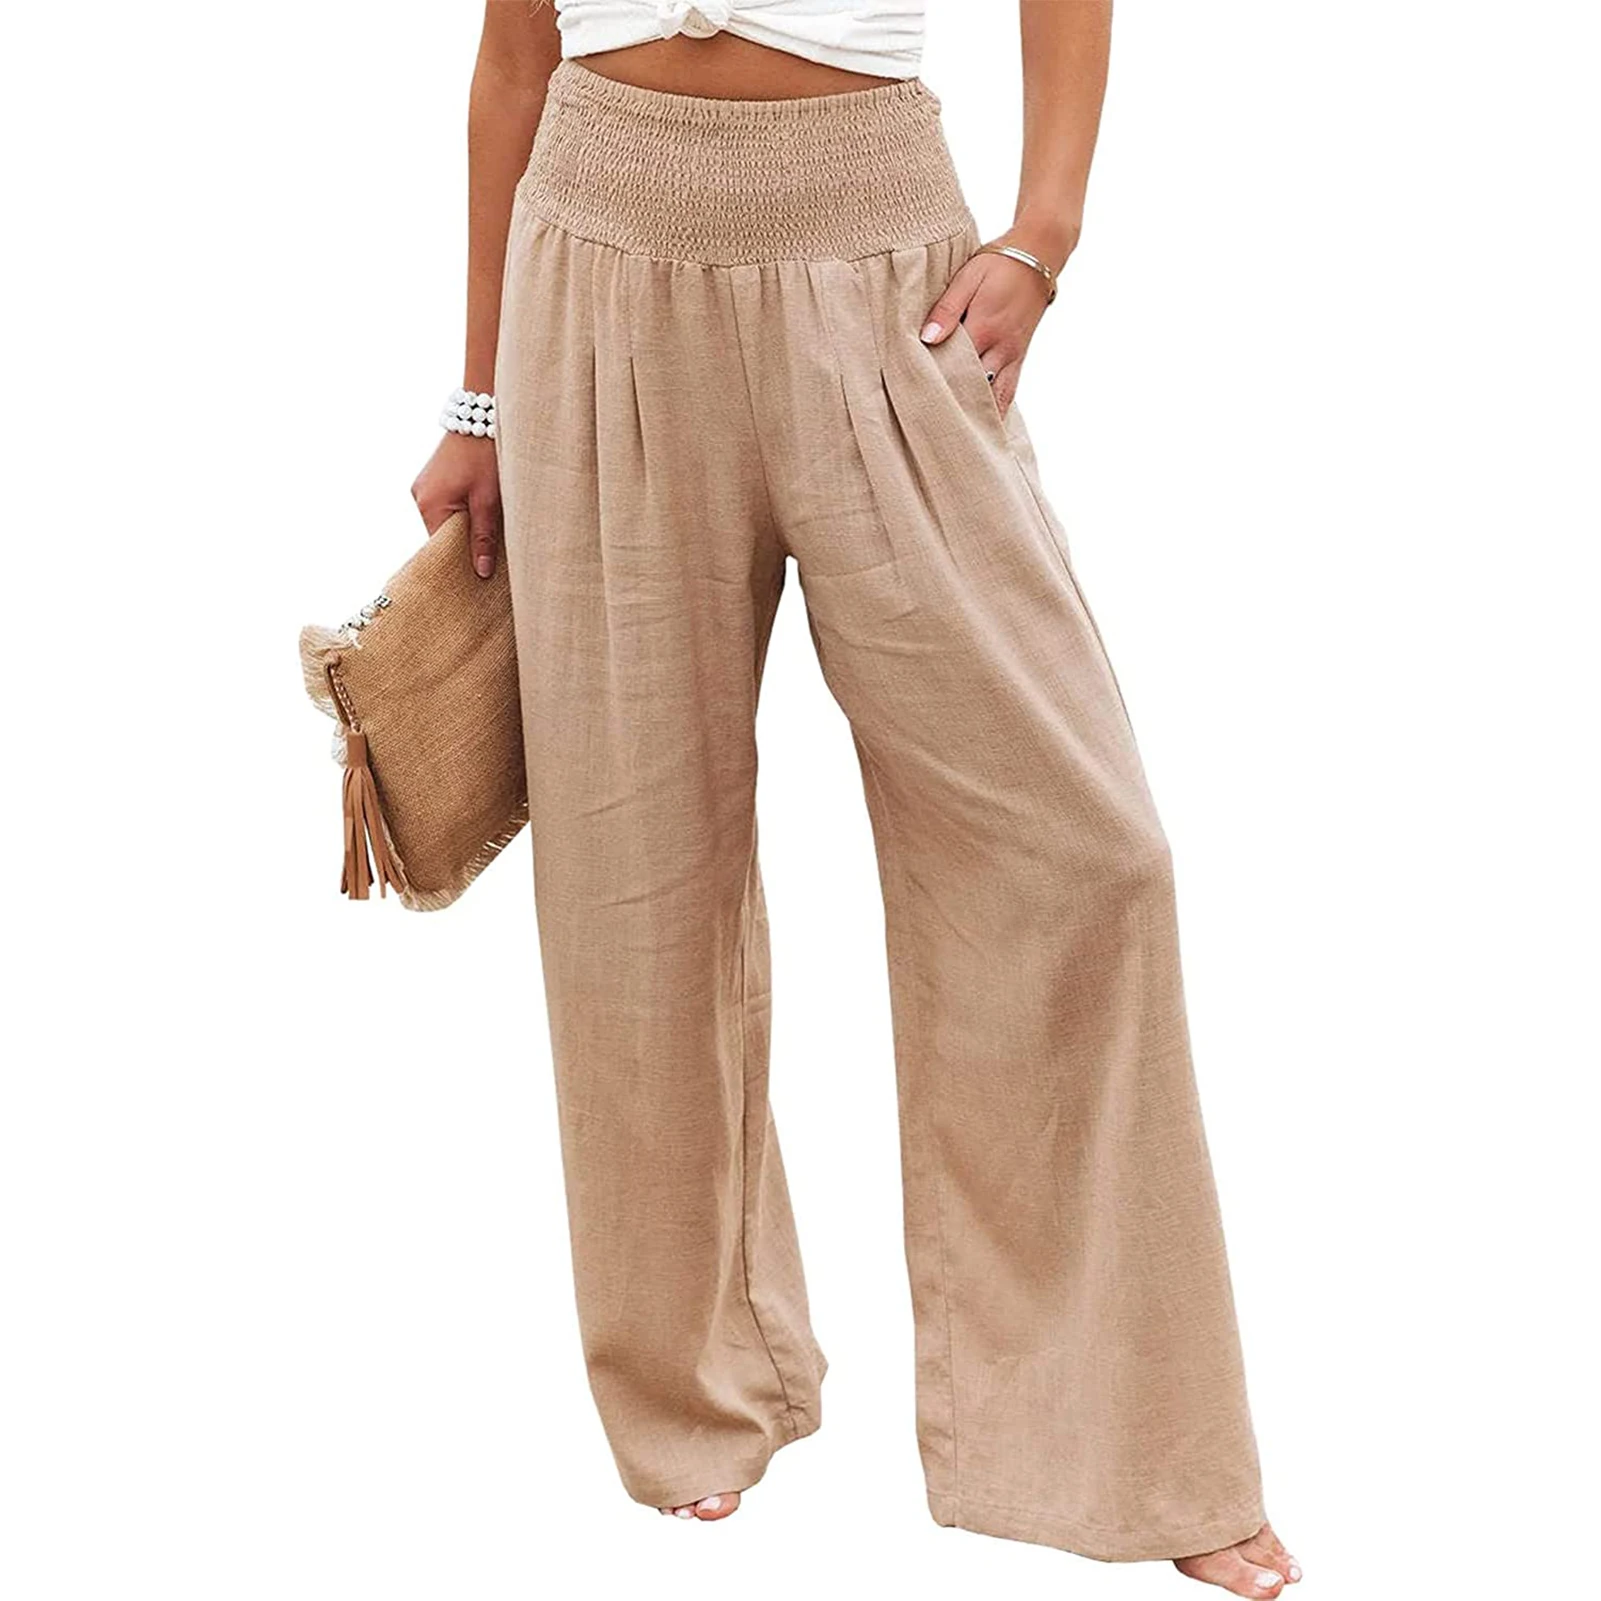 Daily Lounge High Waist Casual Beach Loose Summer With Pocket Long Fashion Solid Women Pants Trousers Cotton Linen Wide Leg